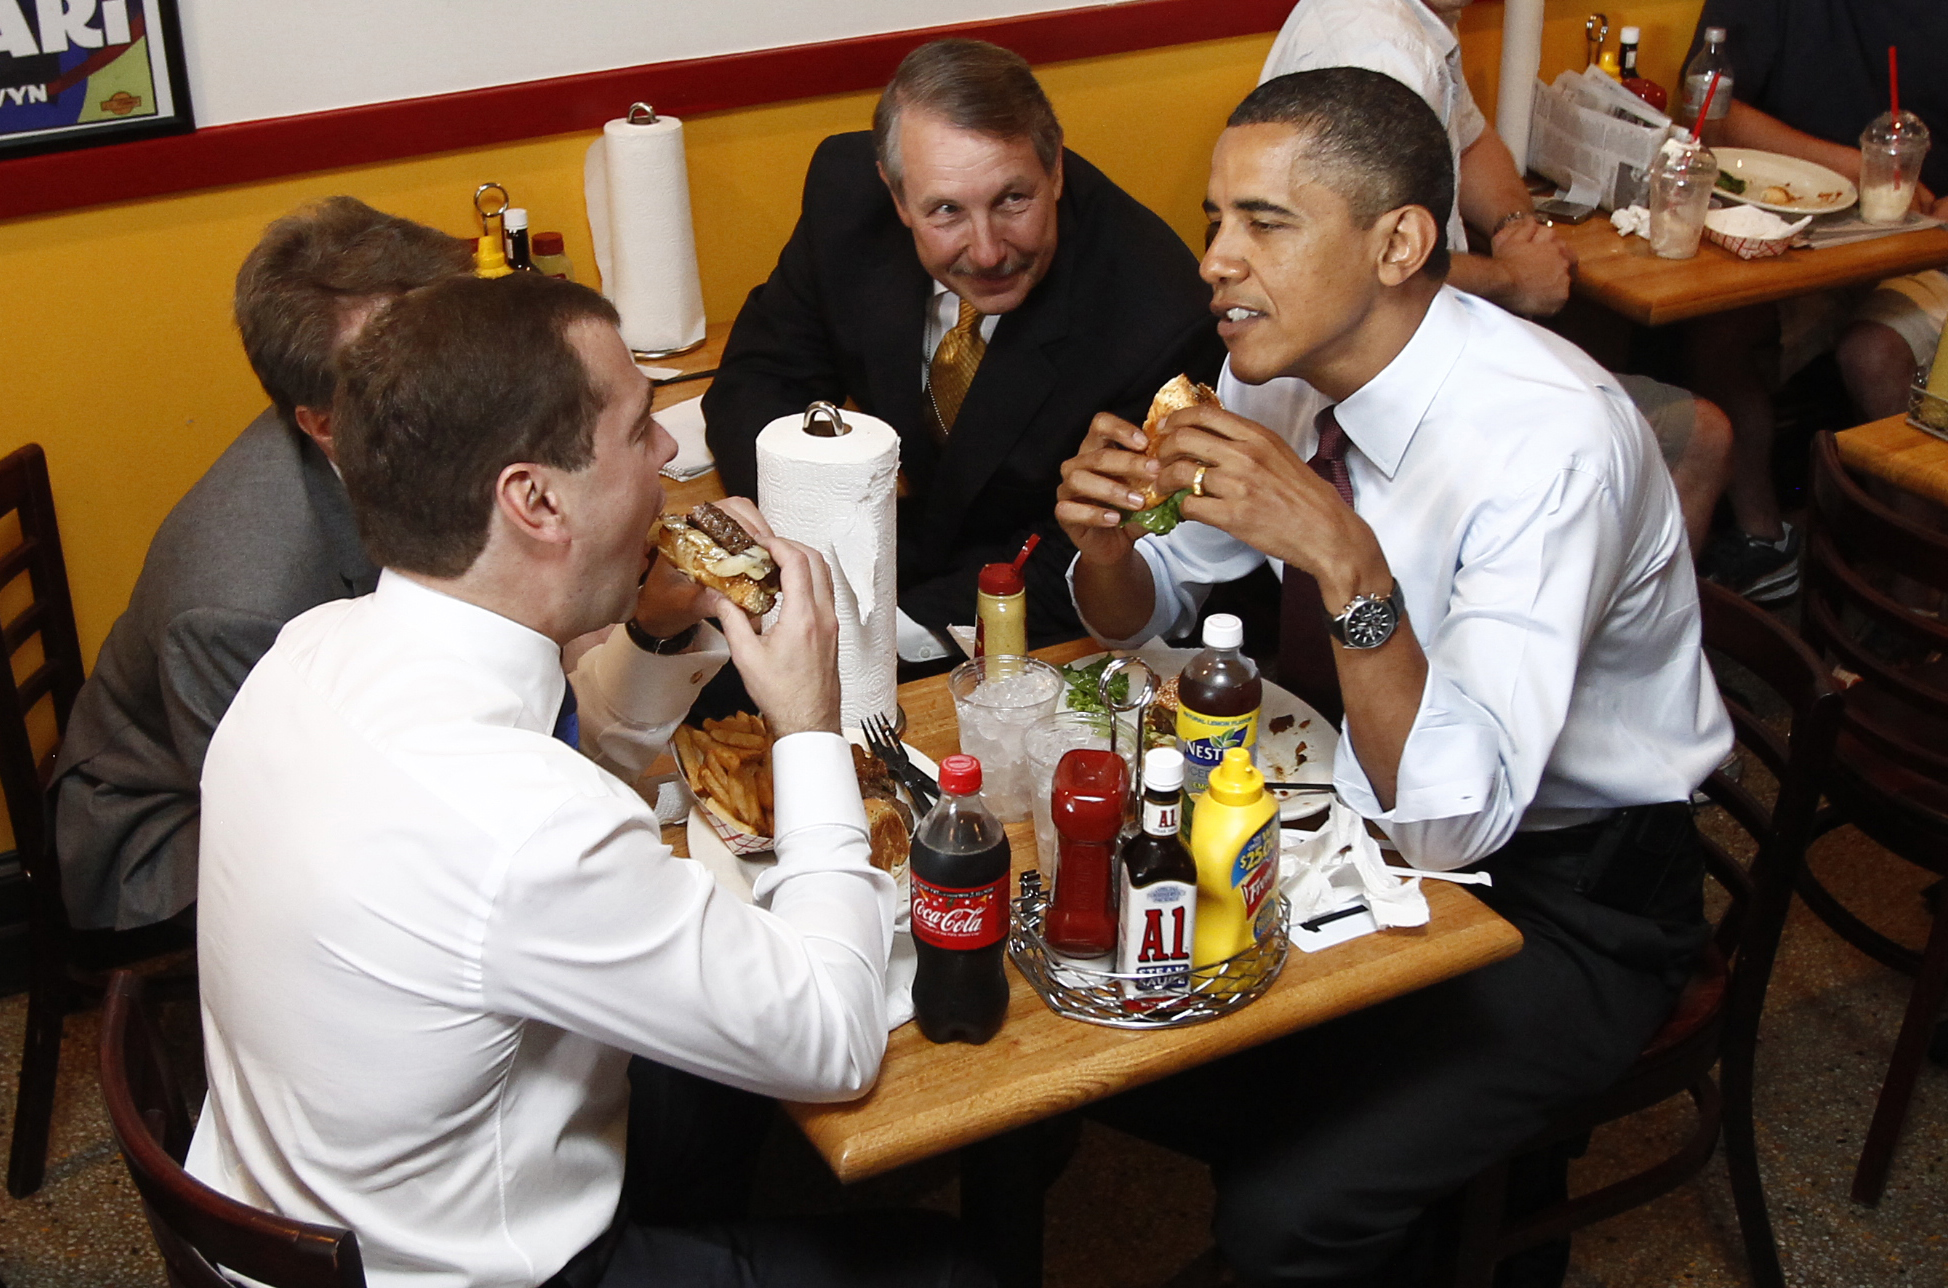 Russia's President Medvedev and U.S. President Obama have burgers for lunch at Ray's Hell Burger restaurant in Arlington